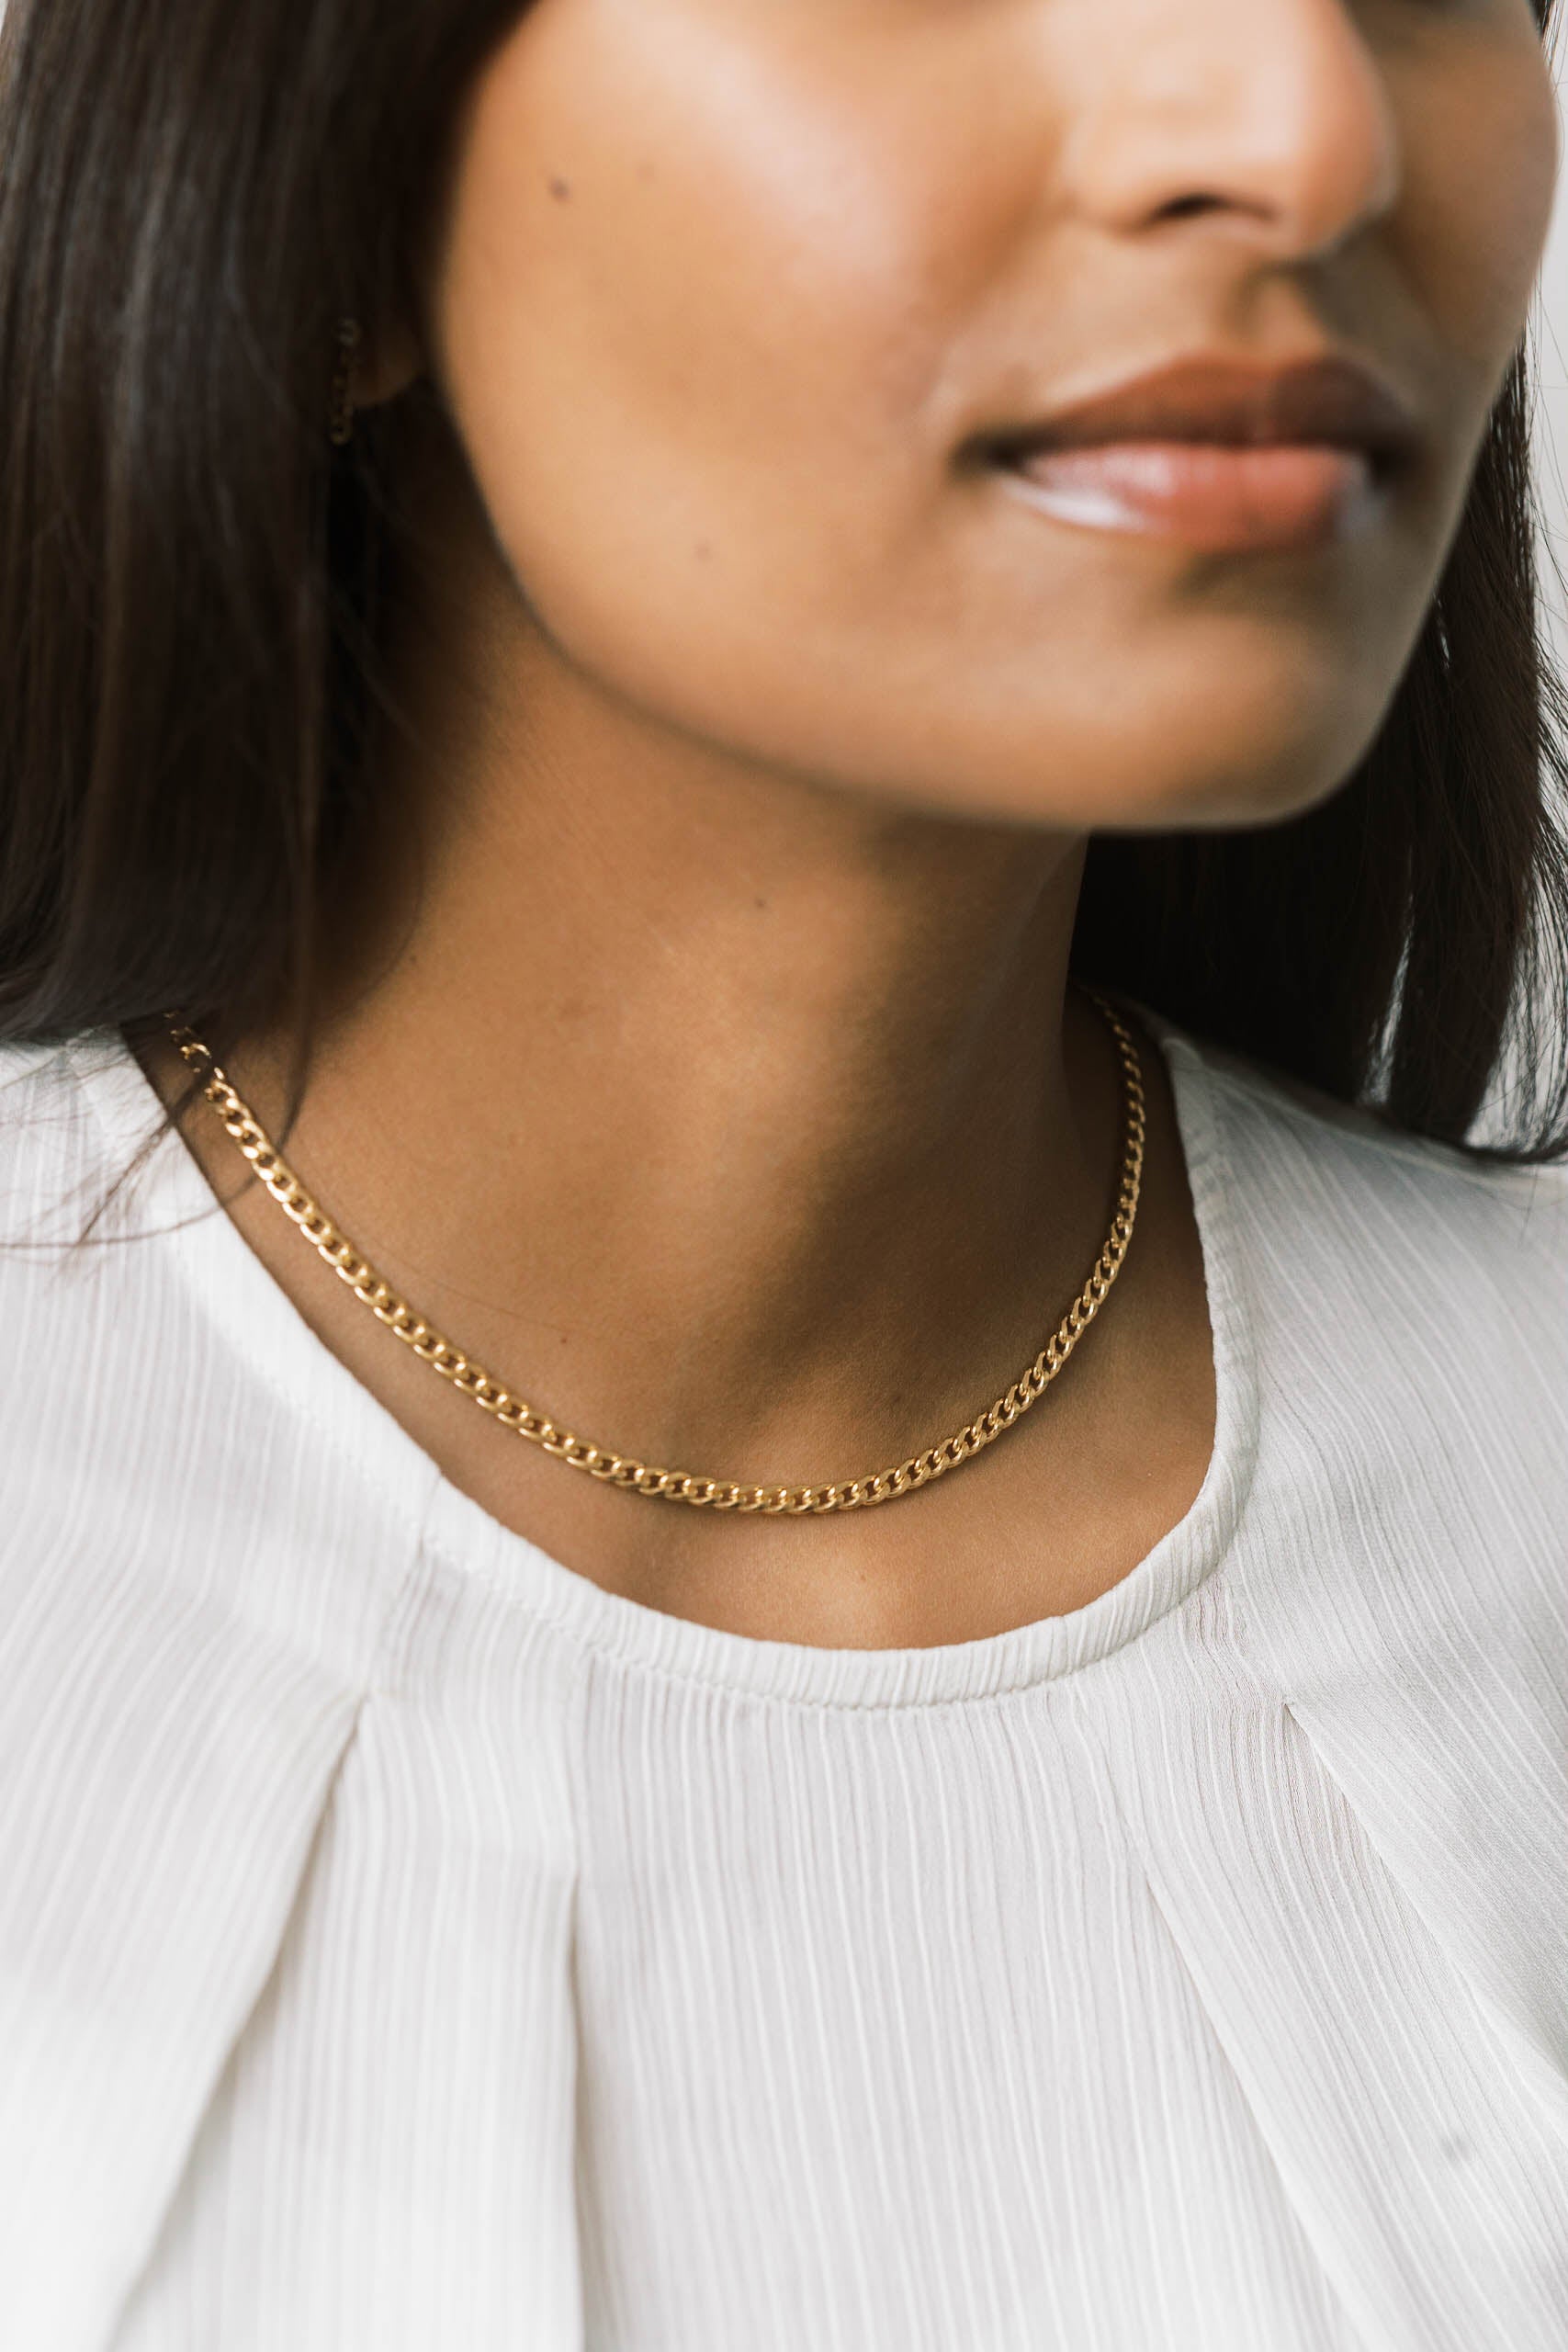 Recycled gold curb chain is simple and modern